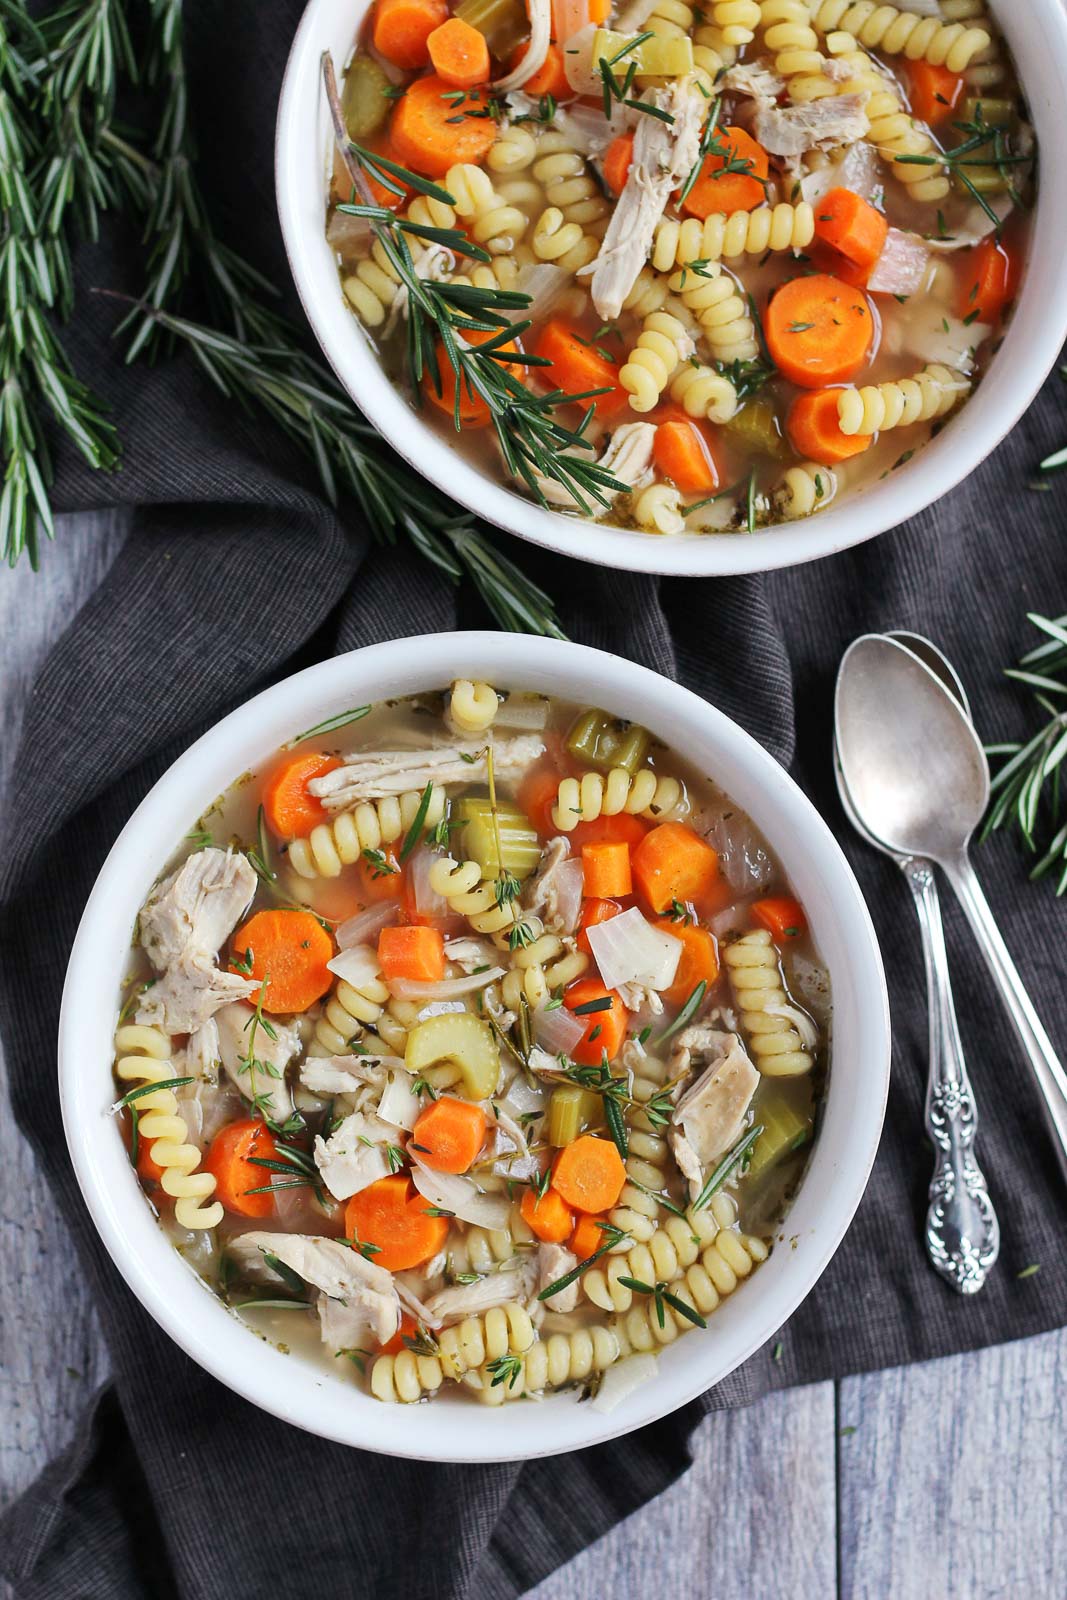 Comforting & Healthy Slow Cooker Chicken Noodle Soup (with a hint of lemon & rosemary) from ambitiouskitchen.com on foodiekitchen.com